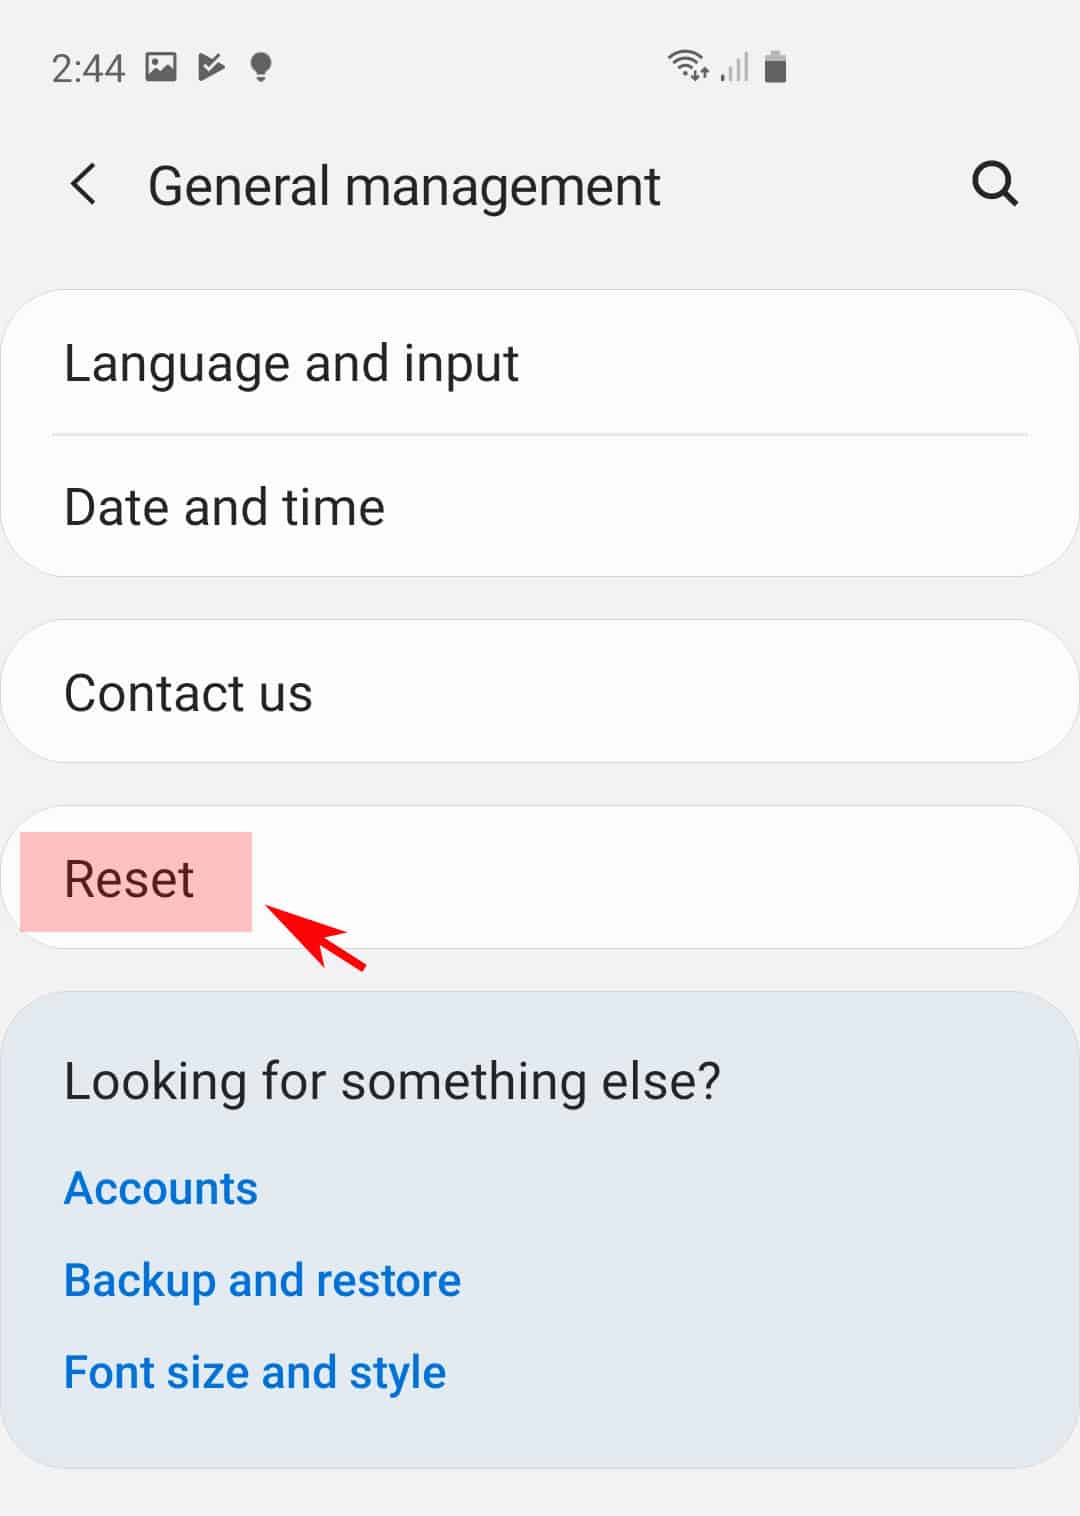 galaxy s20 reset network settings - tap reset 2